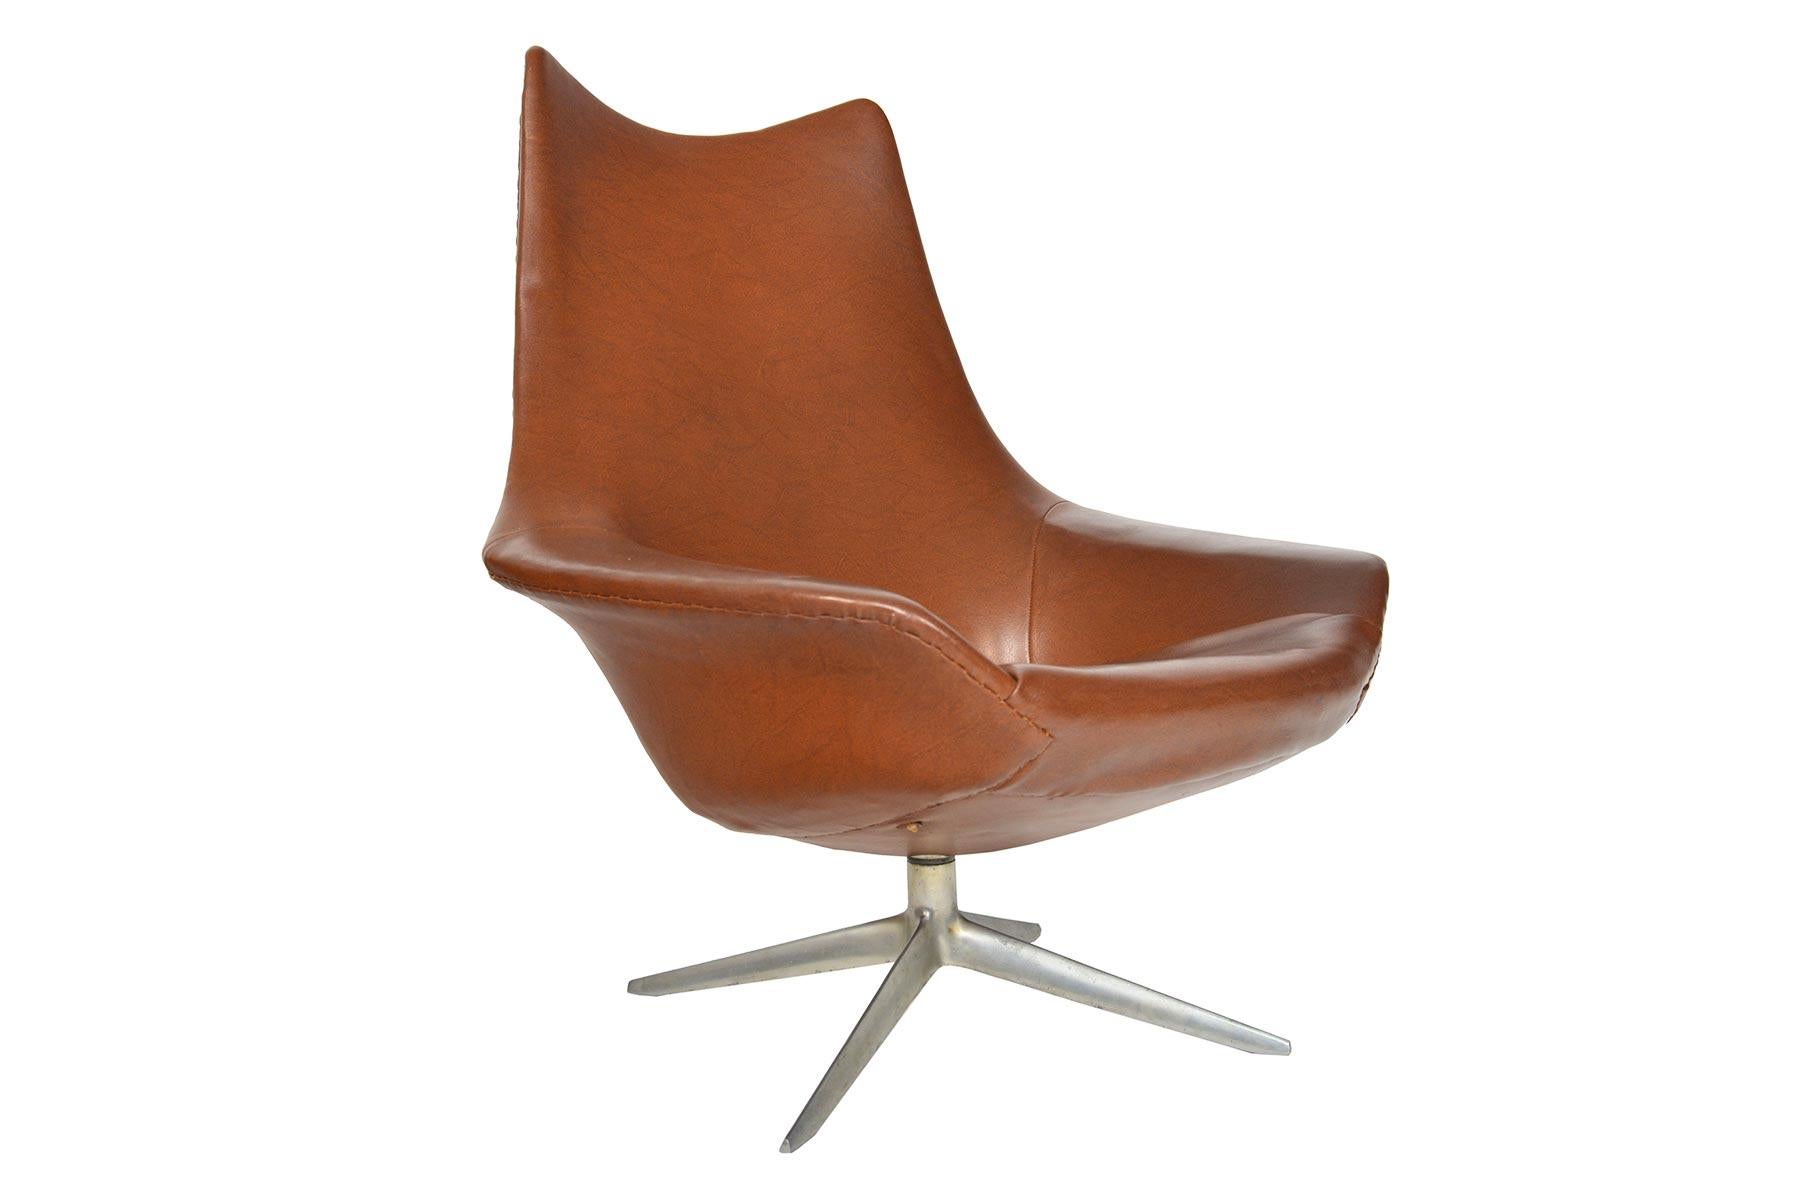 This Space Age swivel chair was designed as Model 208 'Pirouette' by H.W. Klein for N.A. Jørgensens Møbelfabrik in the 1960s. With a sleek, organic form, this brown vinyl lounge chair is upholstered on all sides. The swivel base offers 360° of